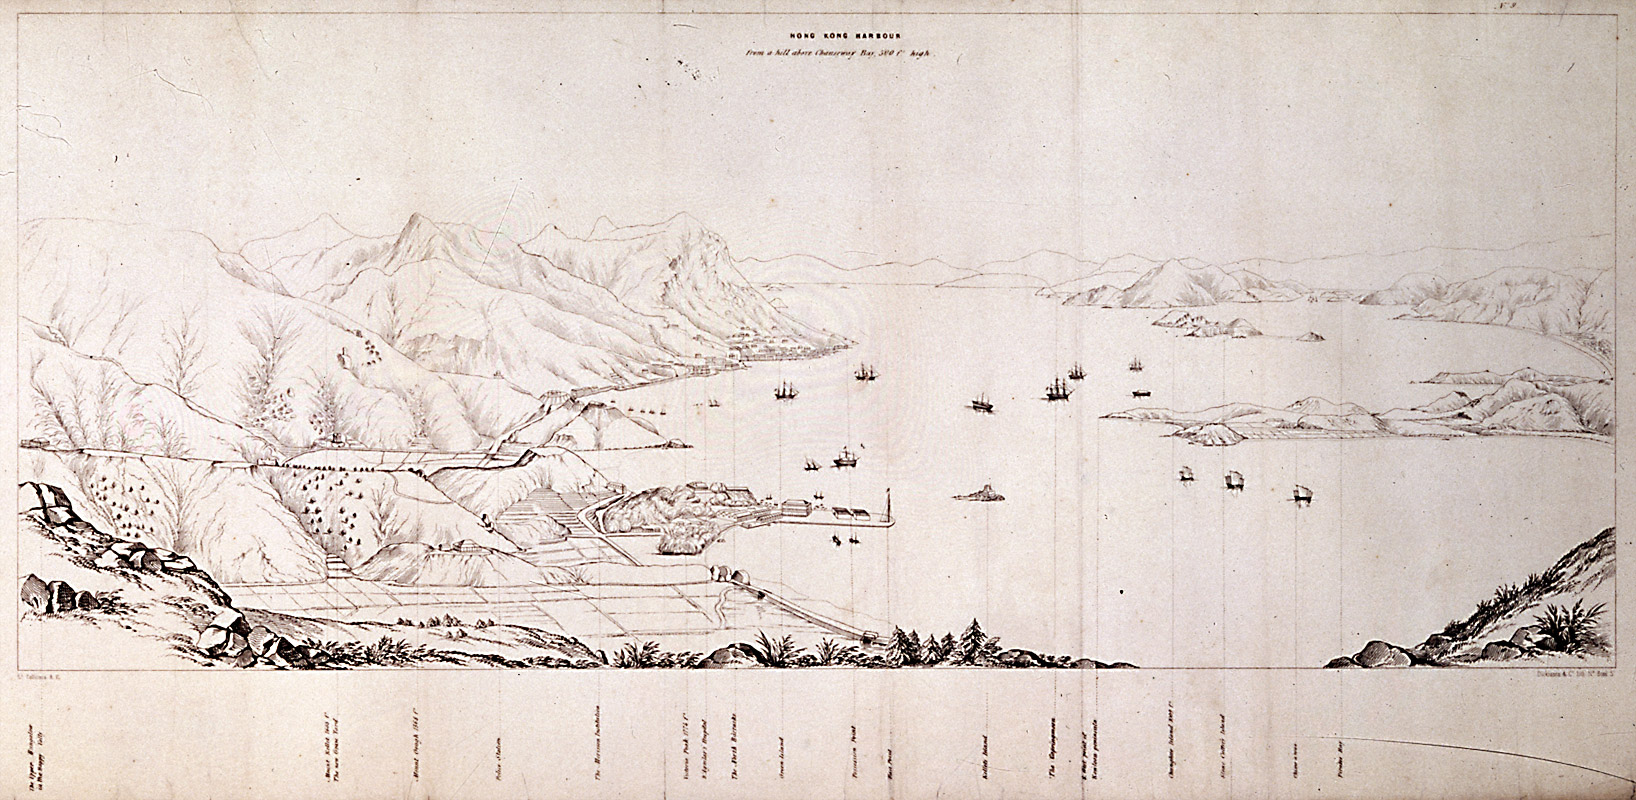 old map of 1840s Victoria Harbour  hong kong maper